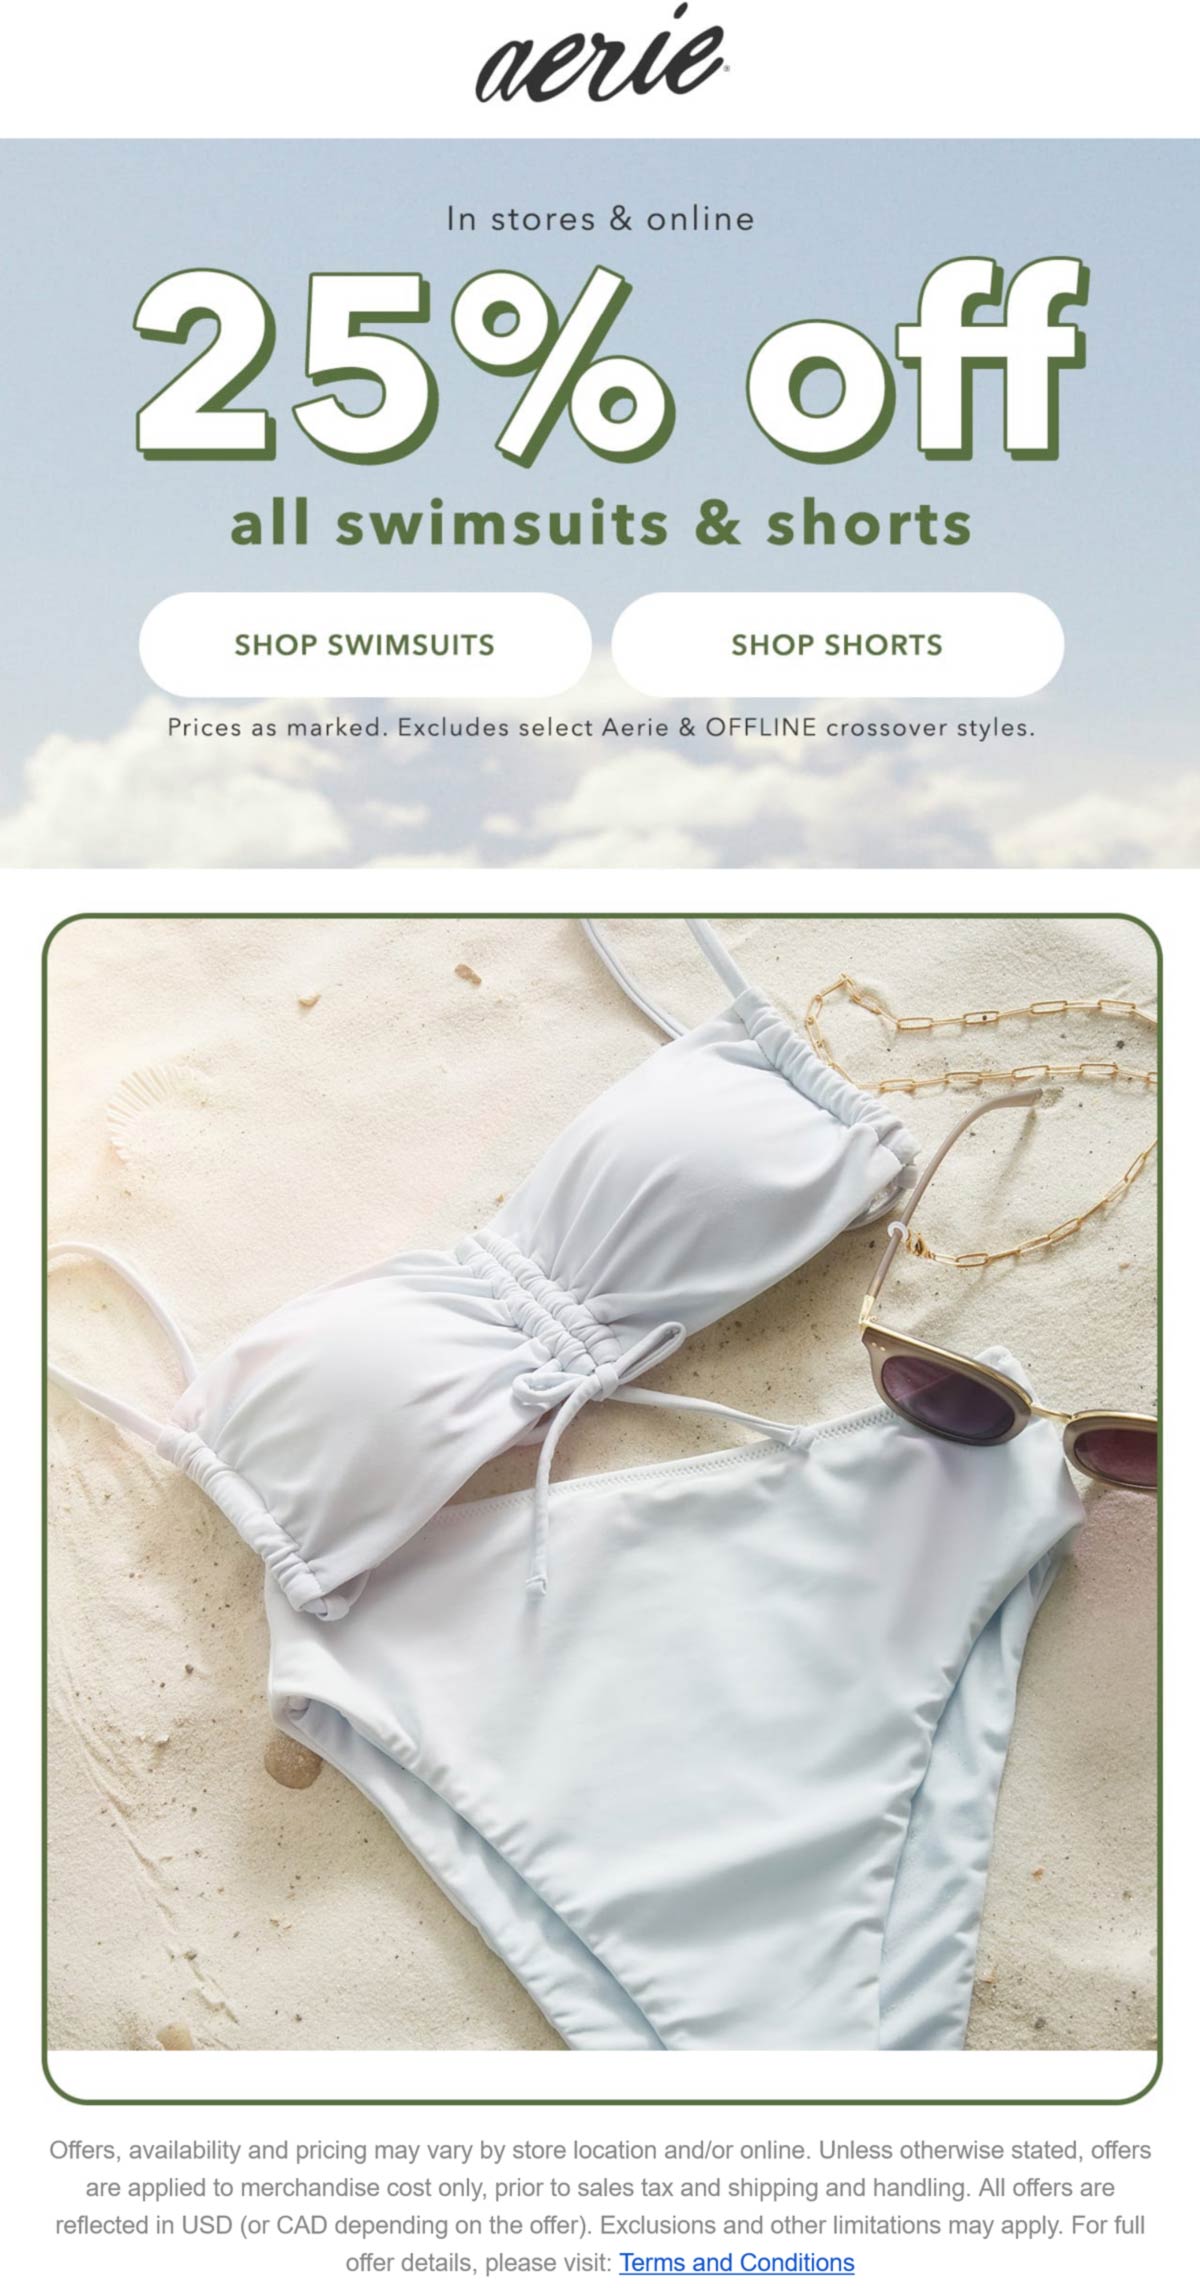 25 off all swimsuits & shorts at Aerie, ditto online aerie The